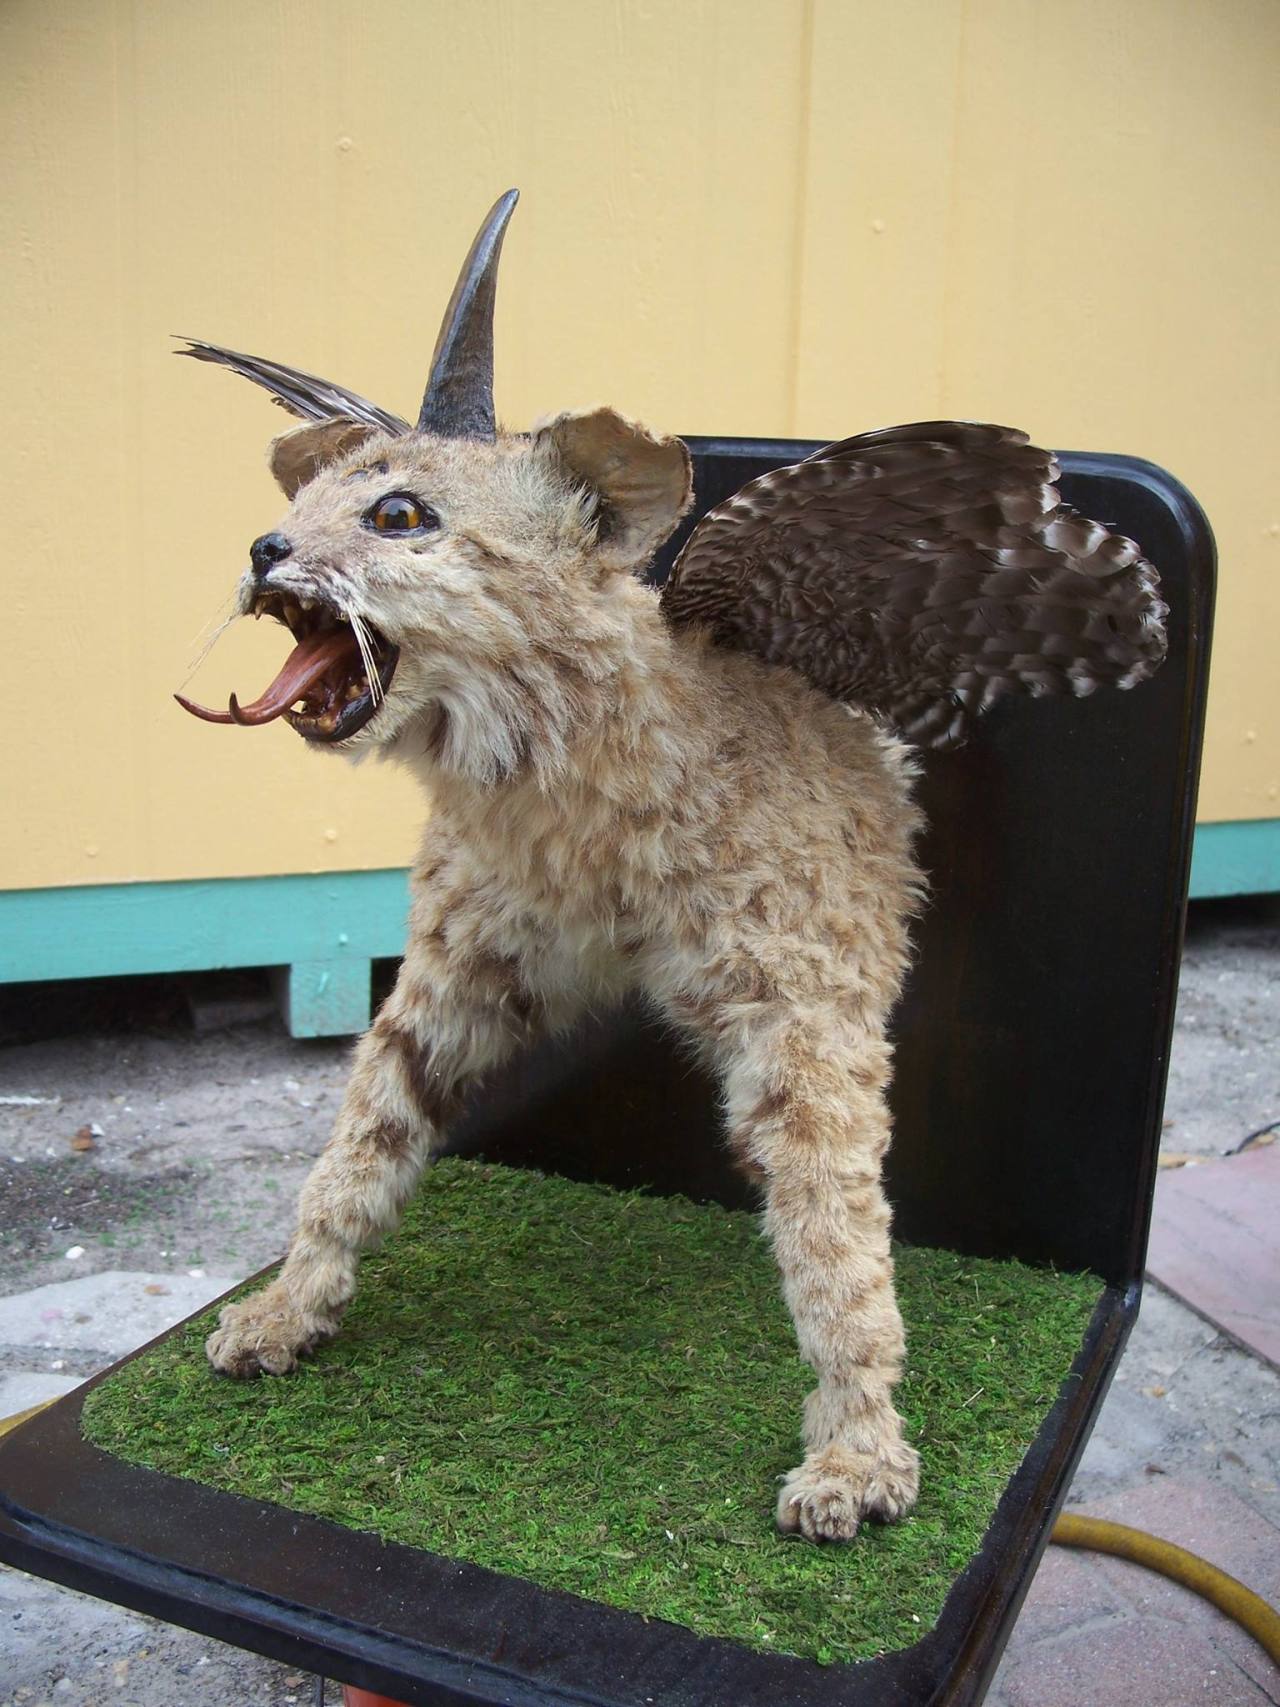 When you go to post a picture of taxidermy hellspawn and then go “hm, that would be an adorable thing to do with my cat when she dies…”
Submitted by Kitty Lovelace via the Crappy Taxidermy FB page